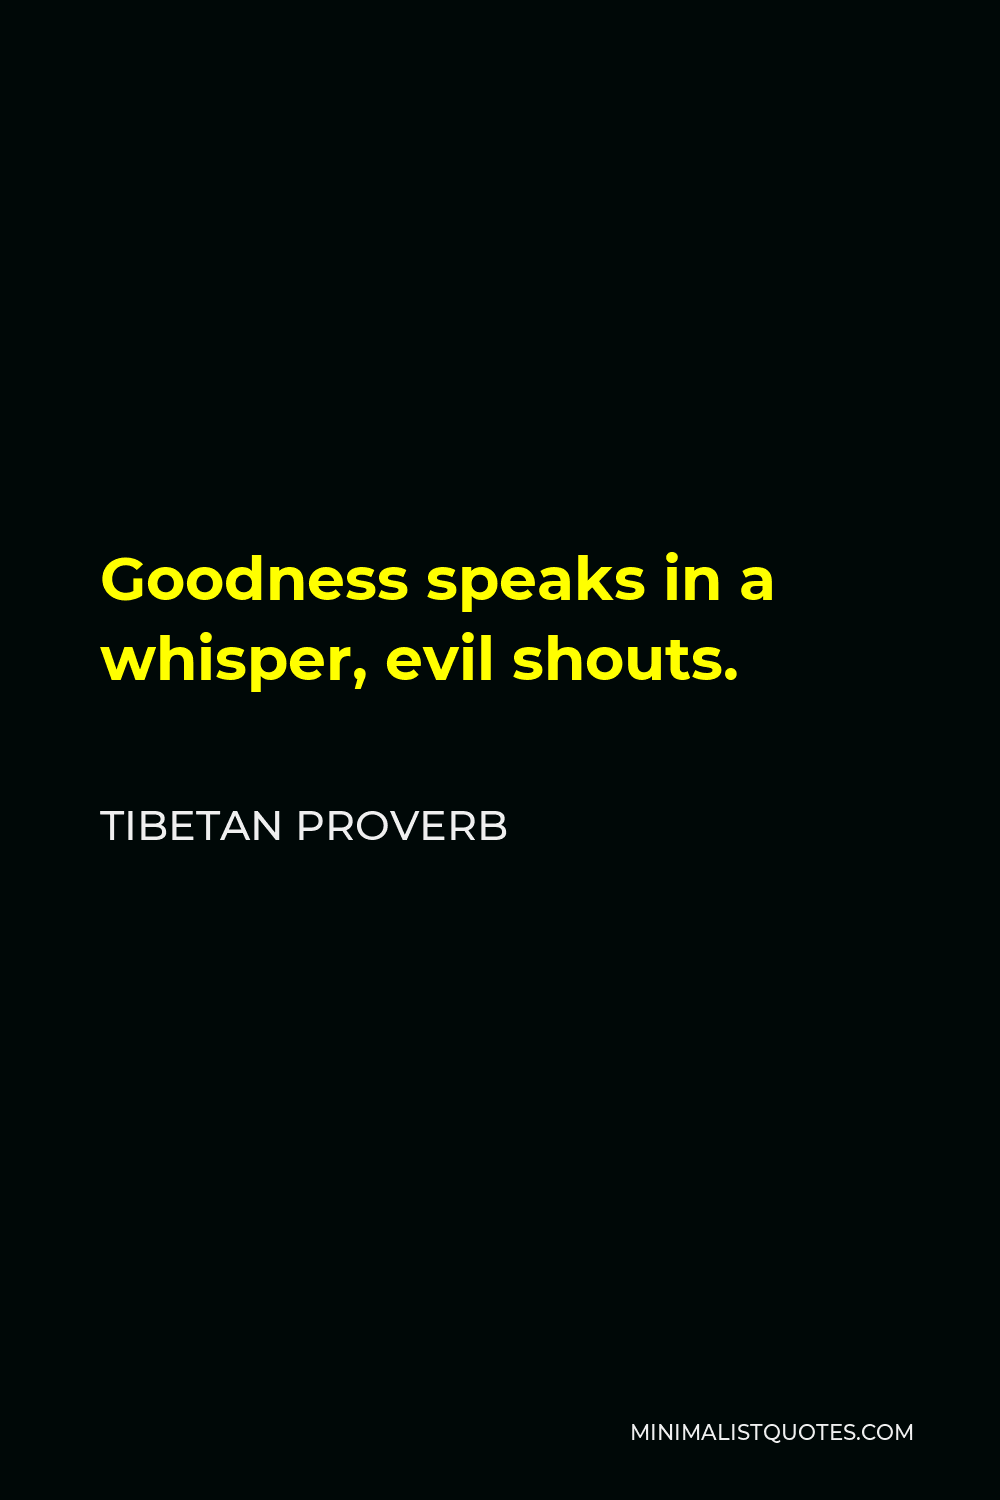 Tibetan Proverb Quote - Goodness speaks in a whisper, evil shouts.